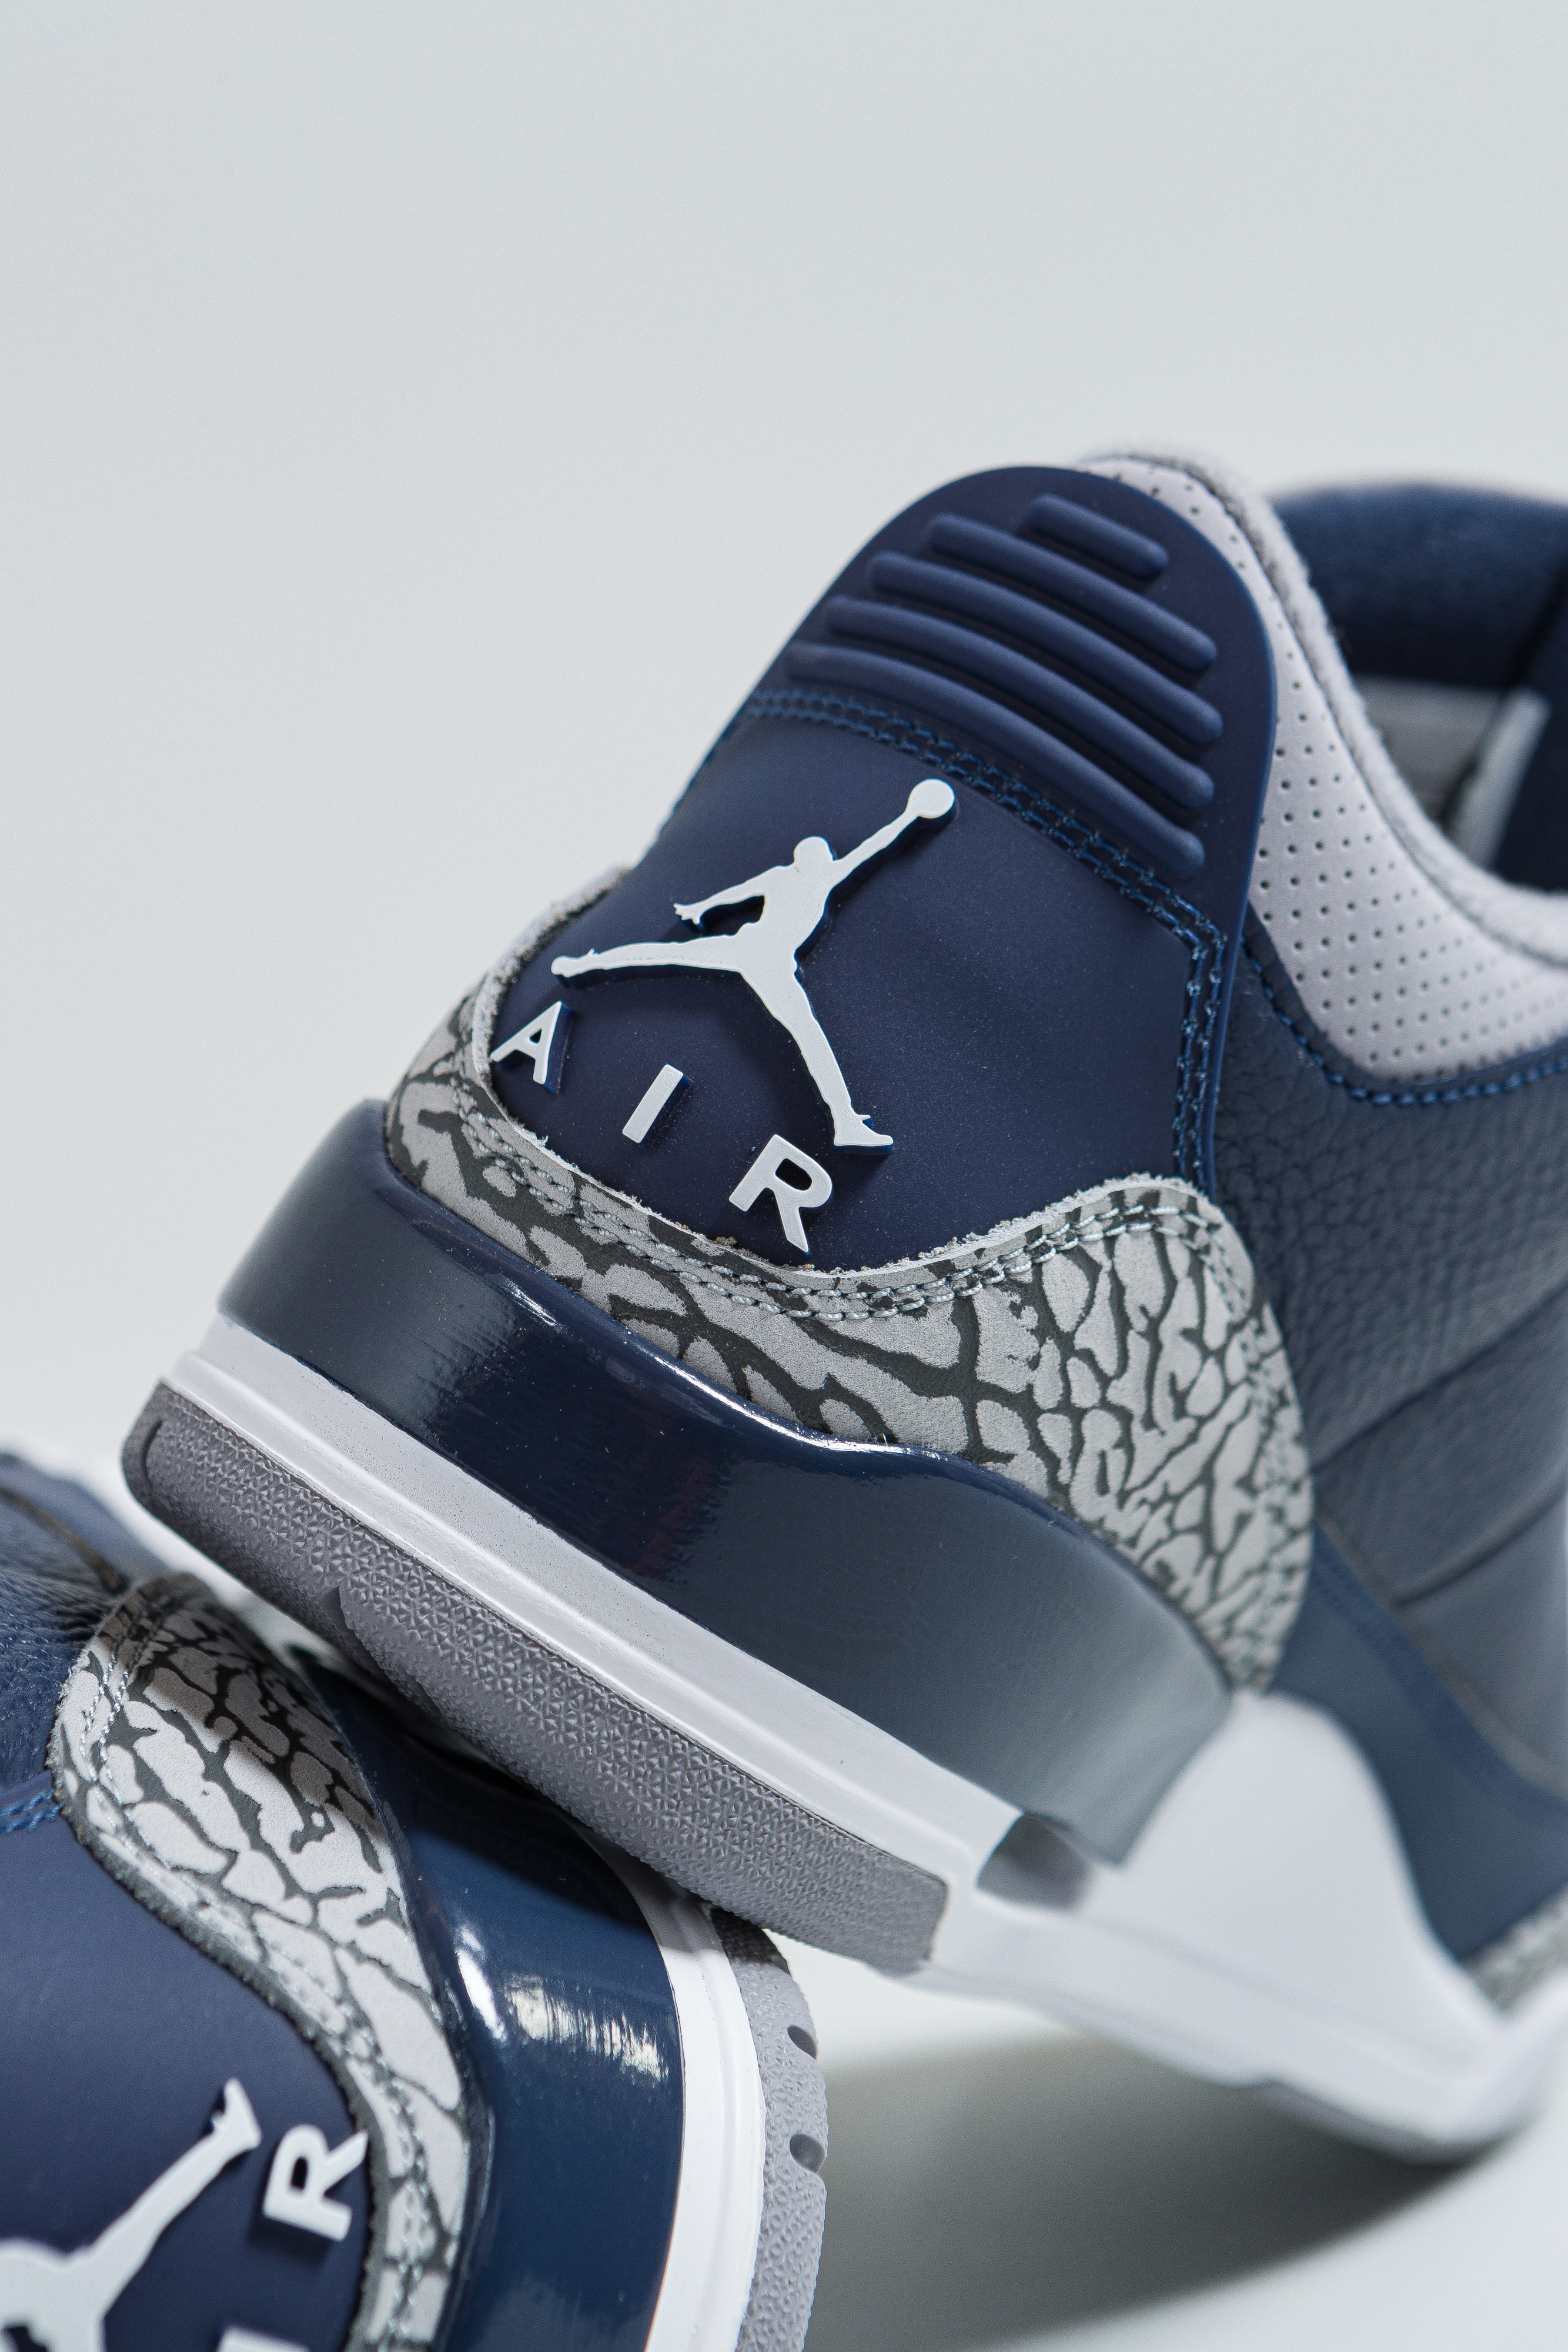 Up There Launches - Nike Air Jordan 3 Retro - Midnight Navy/White-Cement Grey